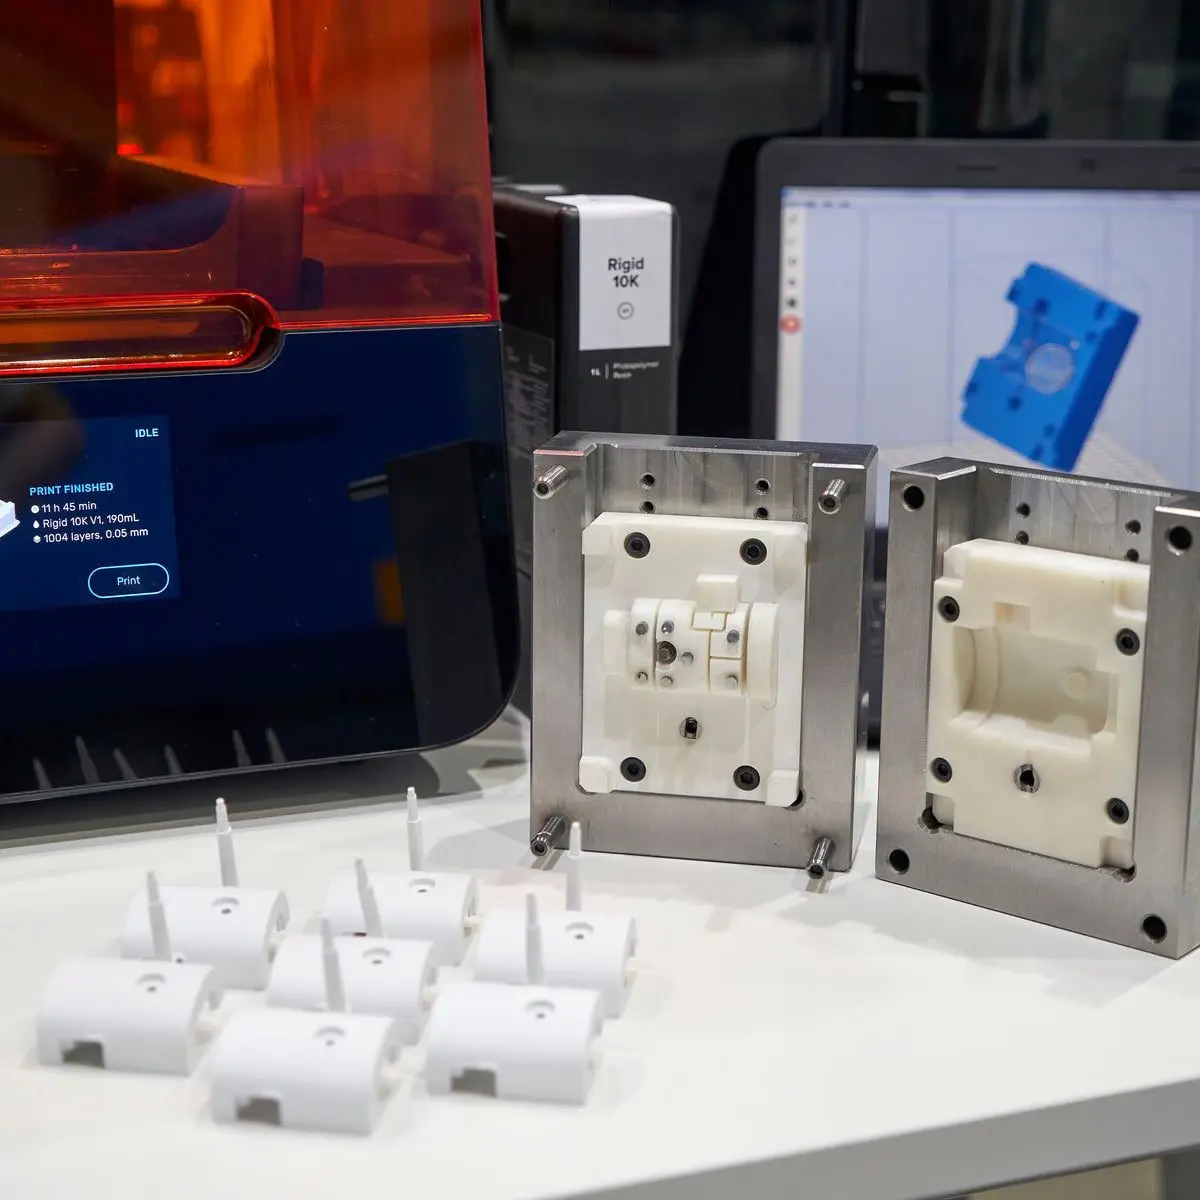 Injection molding with 3D printed molds